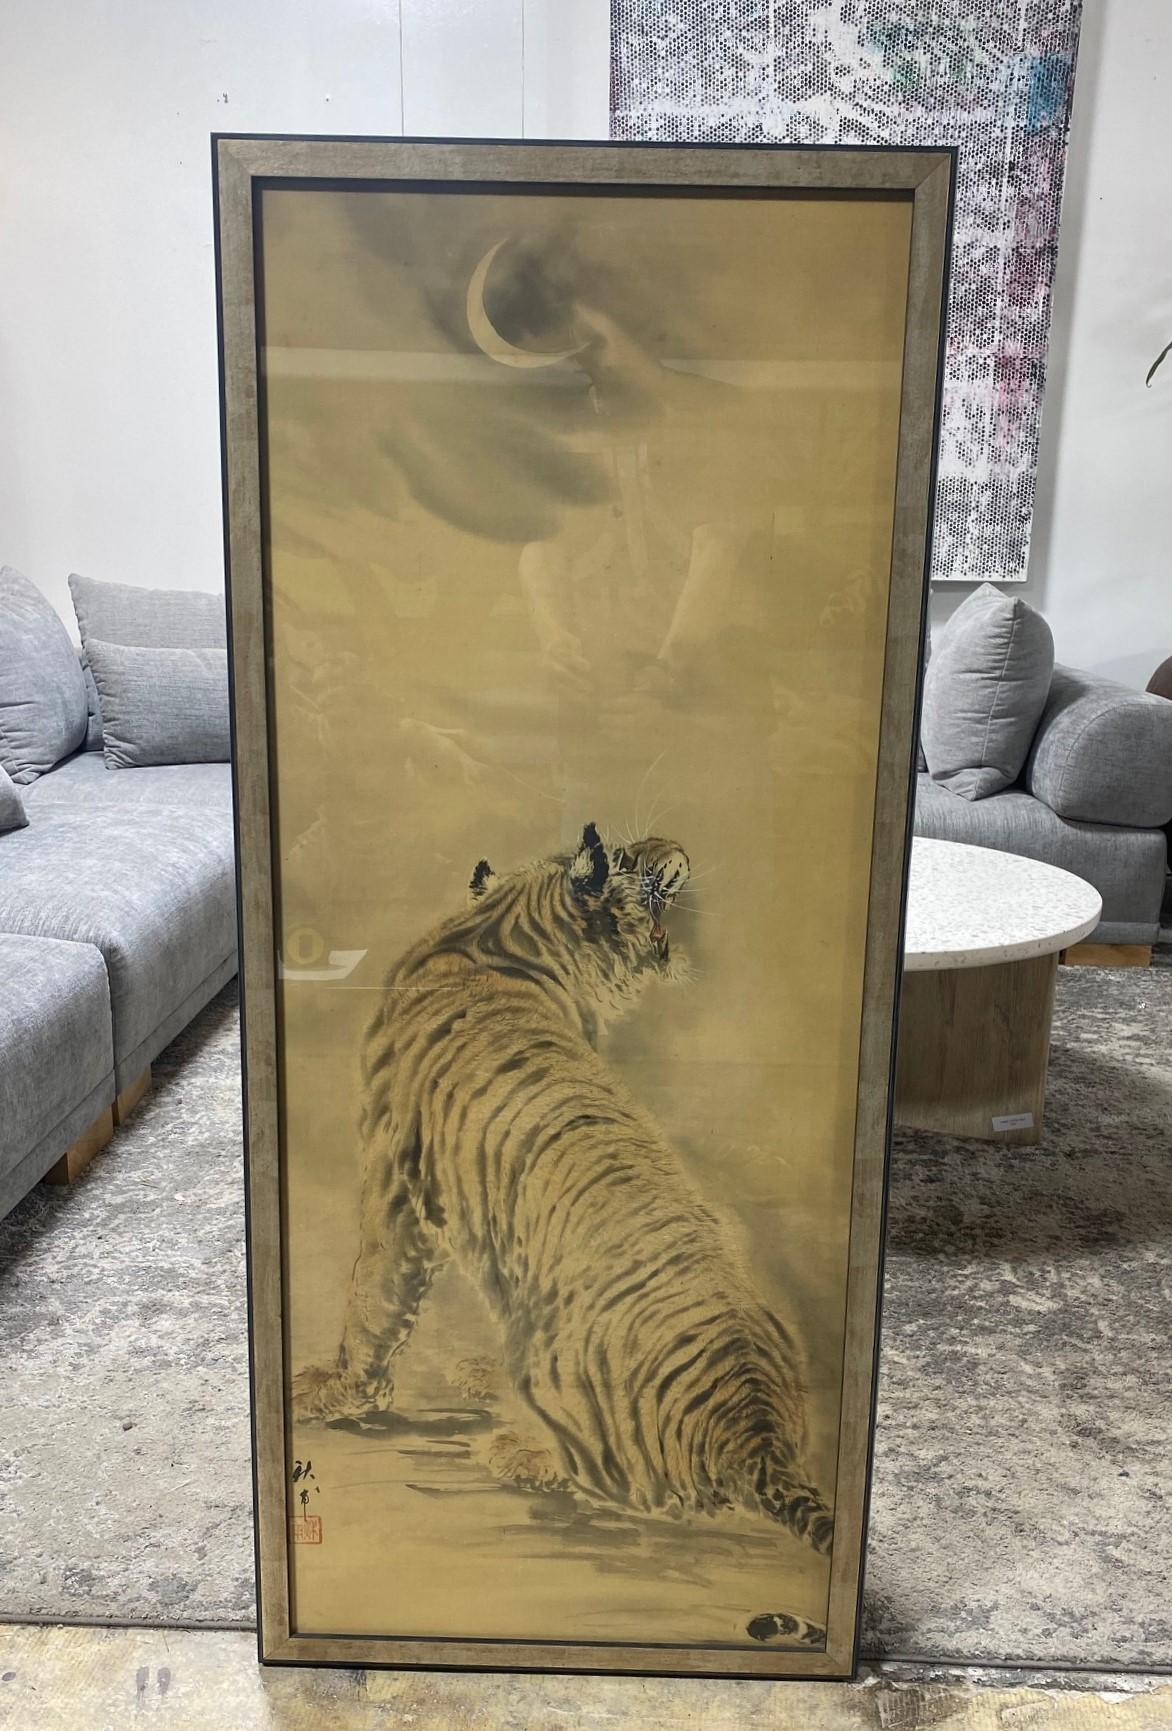 A beautiful and striking framed Asian tiger scroll painting featuring a regal tiger in the moonlight. This work is hand-painted with masterful brushstrokes on a silk/linen surface. We believe the work is Japanese but are not entirely sure as it